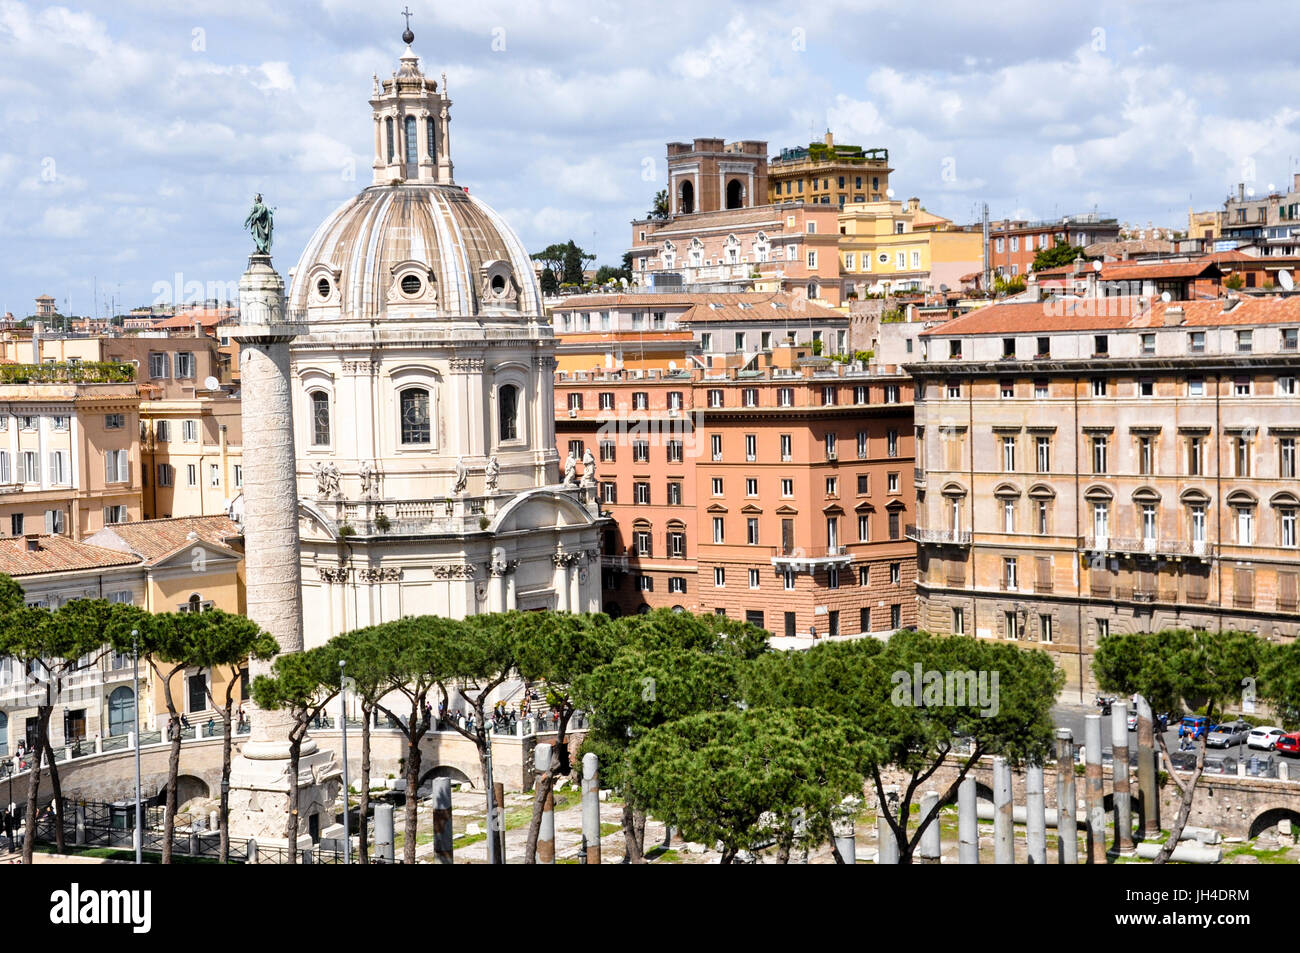 Church of the Most Holy Name of Mary and Trajan's Column in Trajan's Forum, Rome, Italy. Stock Photo